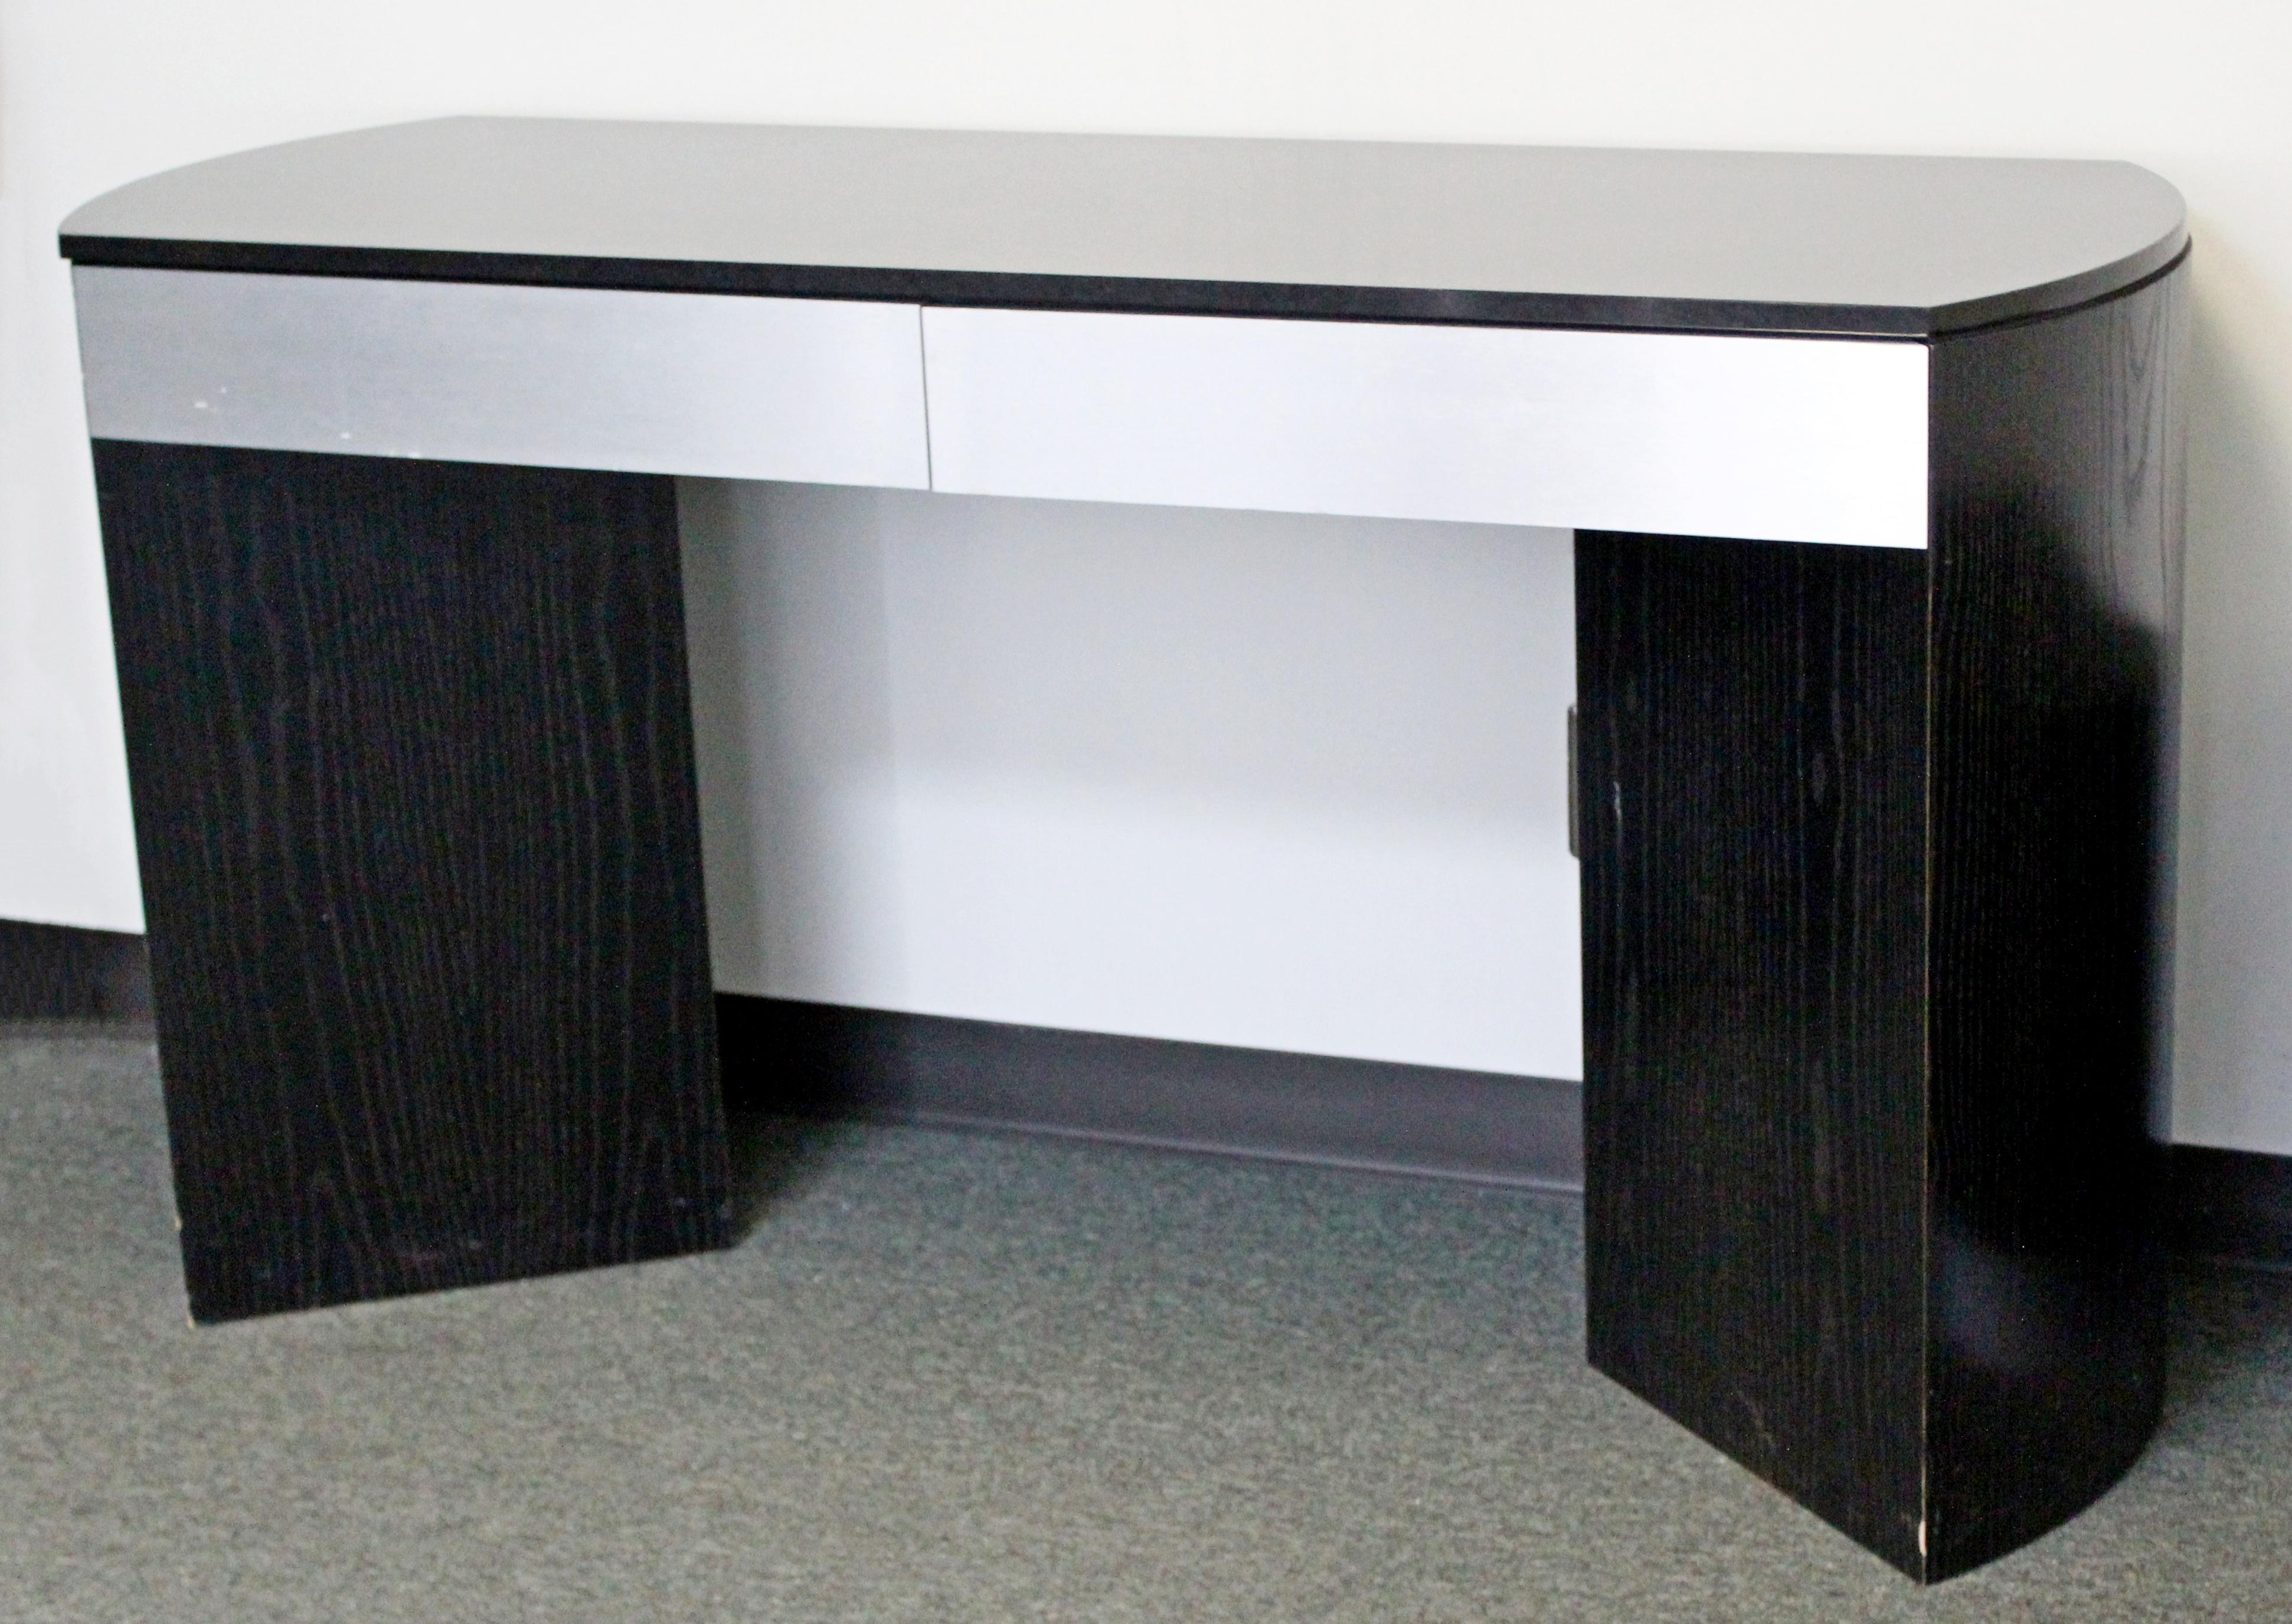 American Contemporary Modern Black Wood Granite Topped Console Table with 2 Drawers 1980s